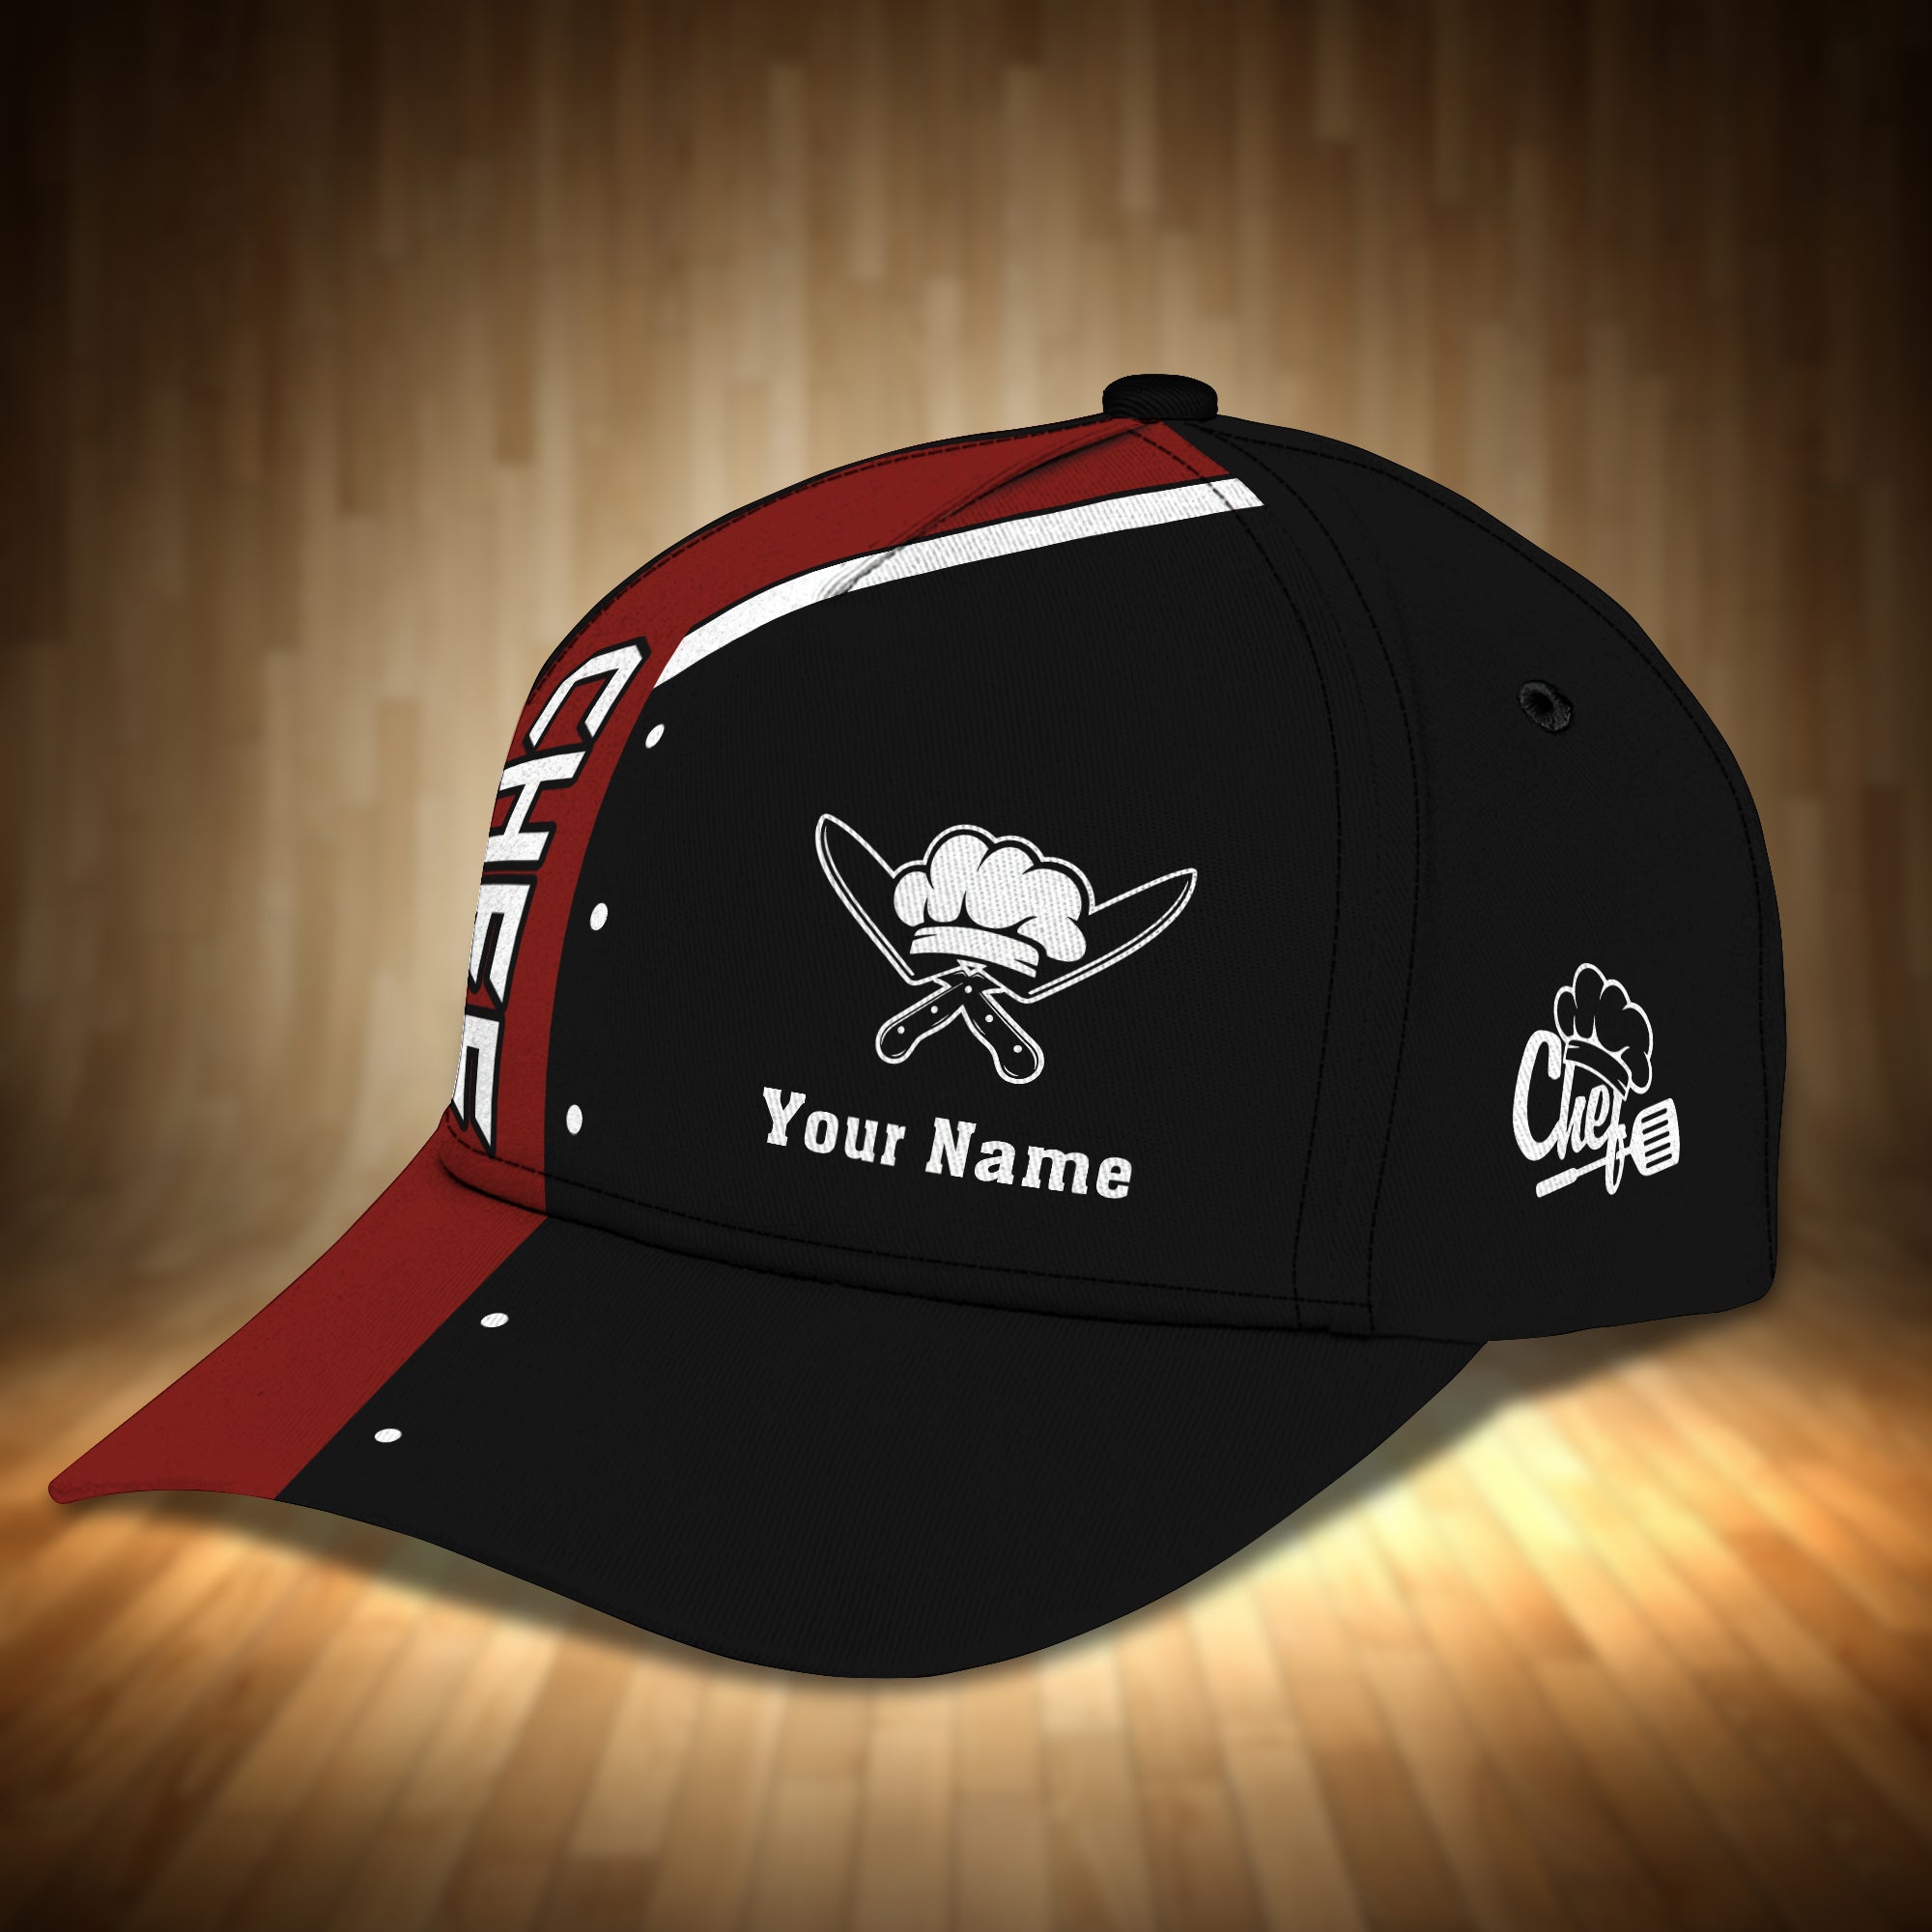 Chef Cook Personalized Name Cap 18 RinC98 Black & Red